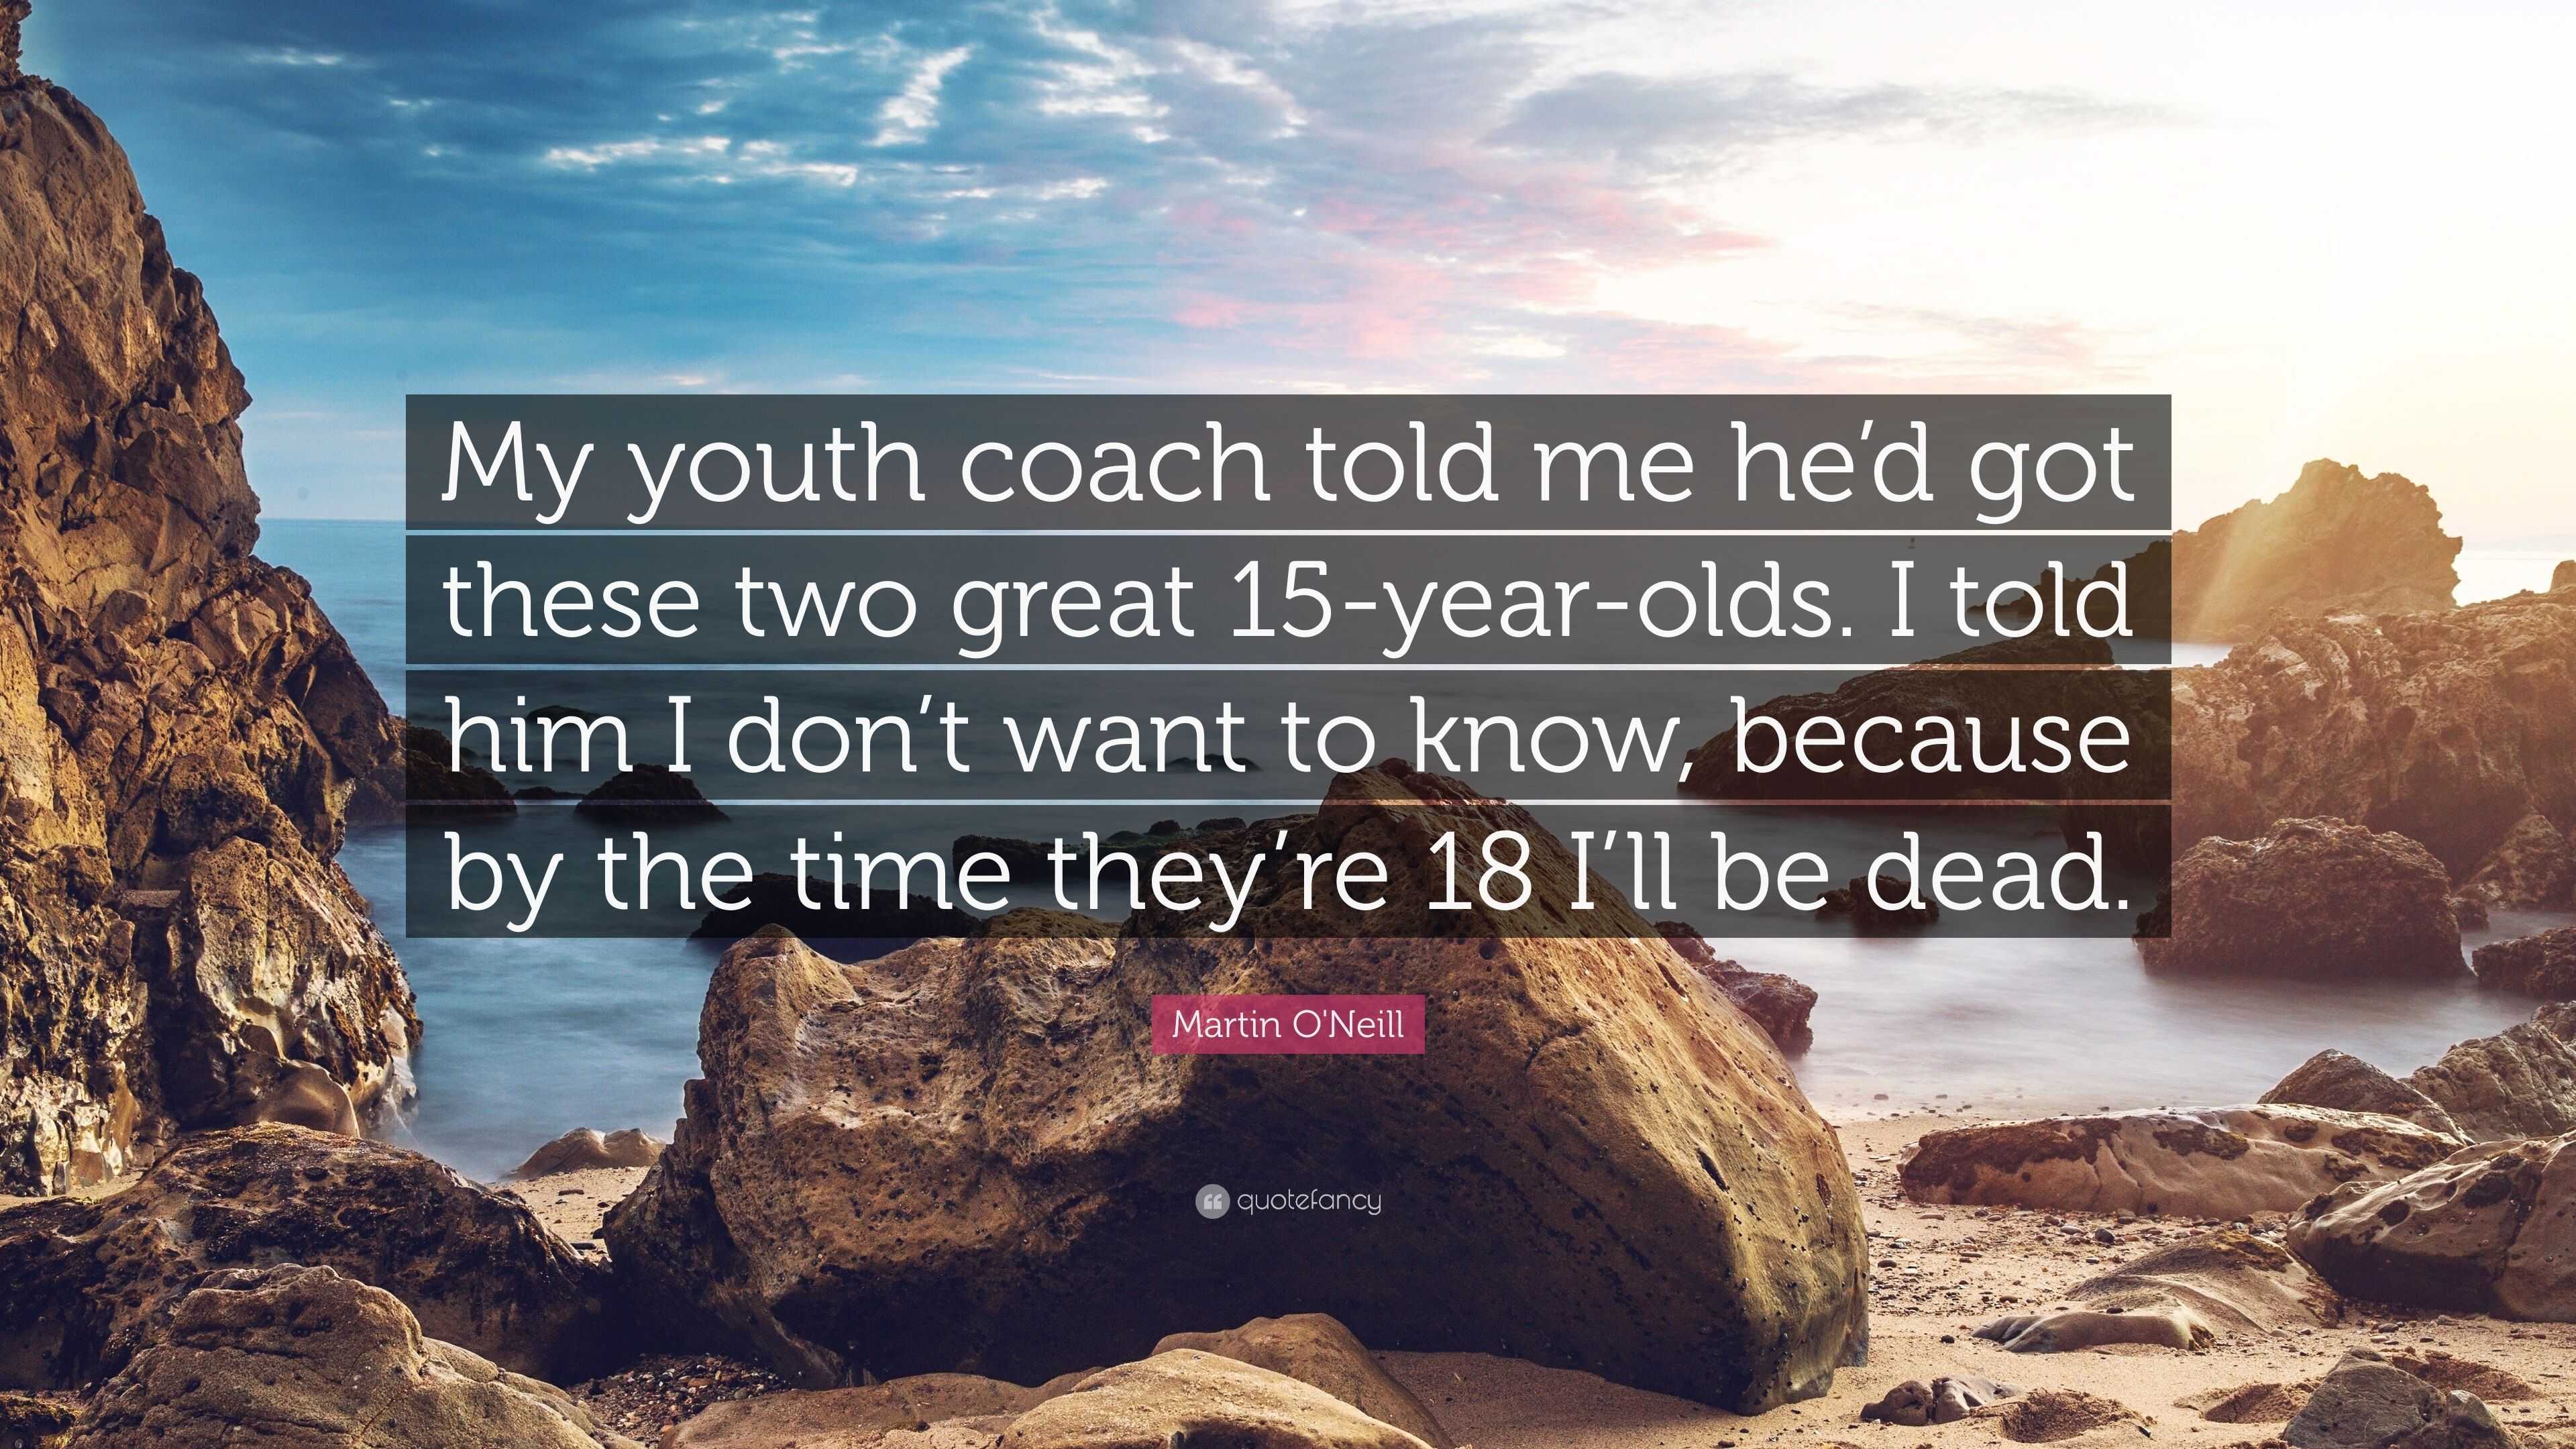 At 10 years old, my coach told me You won't have success if you